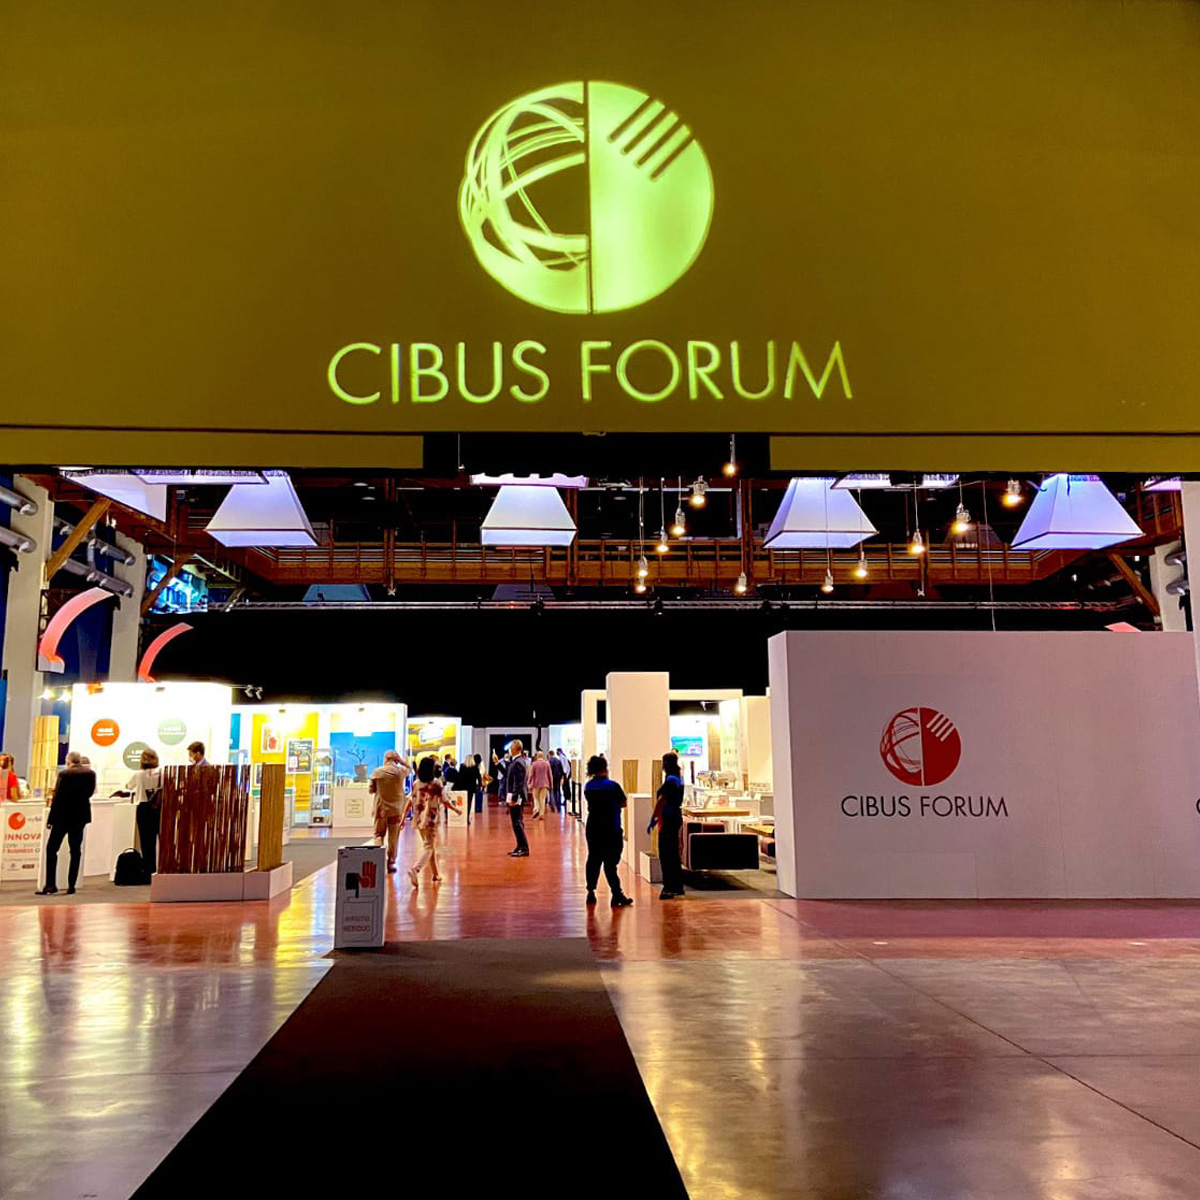 Two Awards at the Cibus Forum Parma 2020